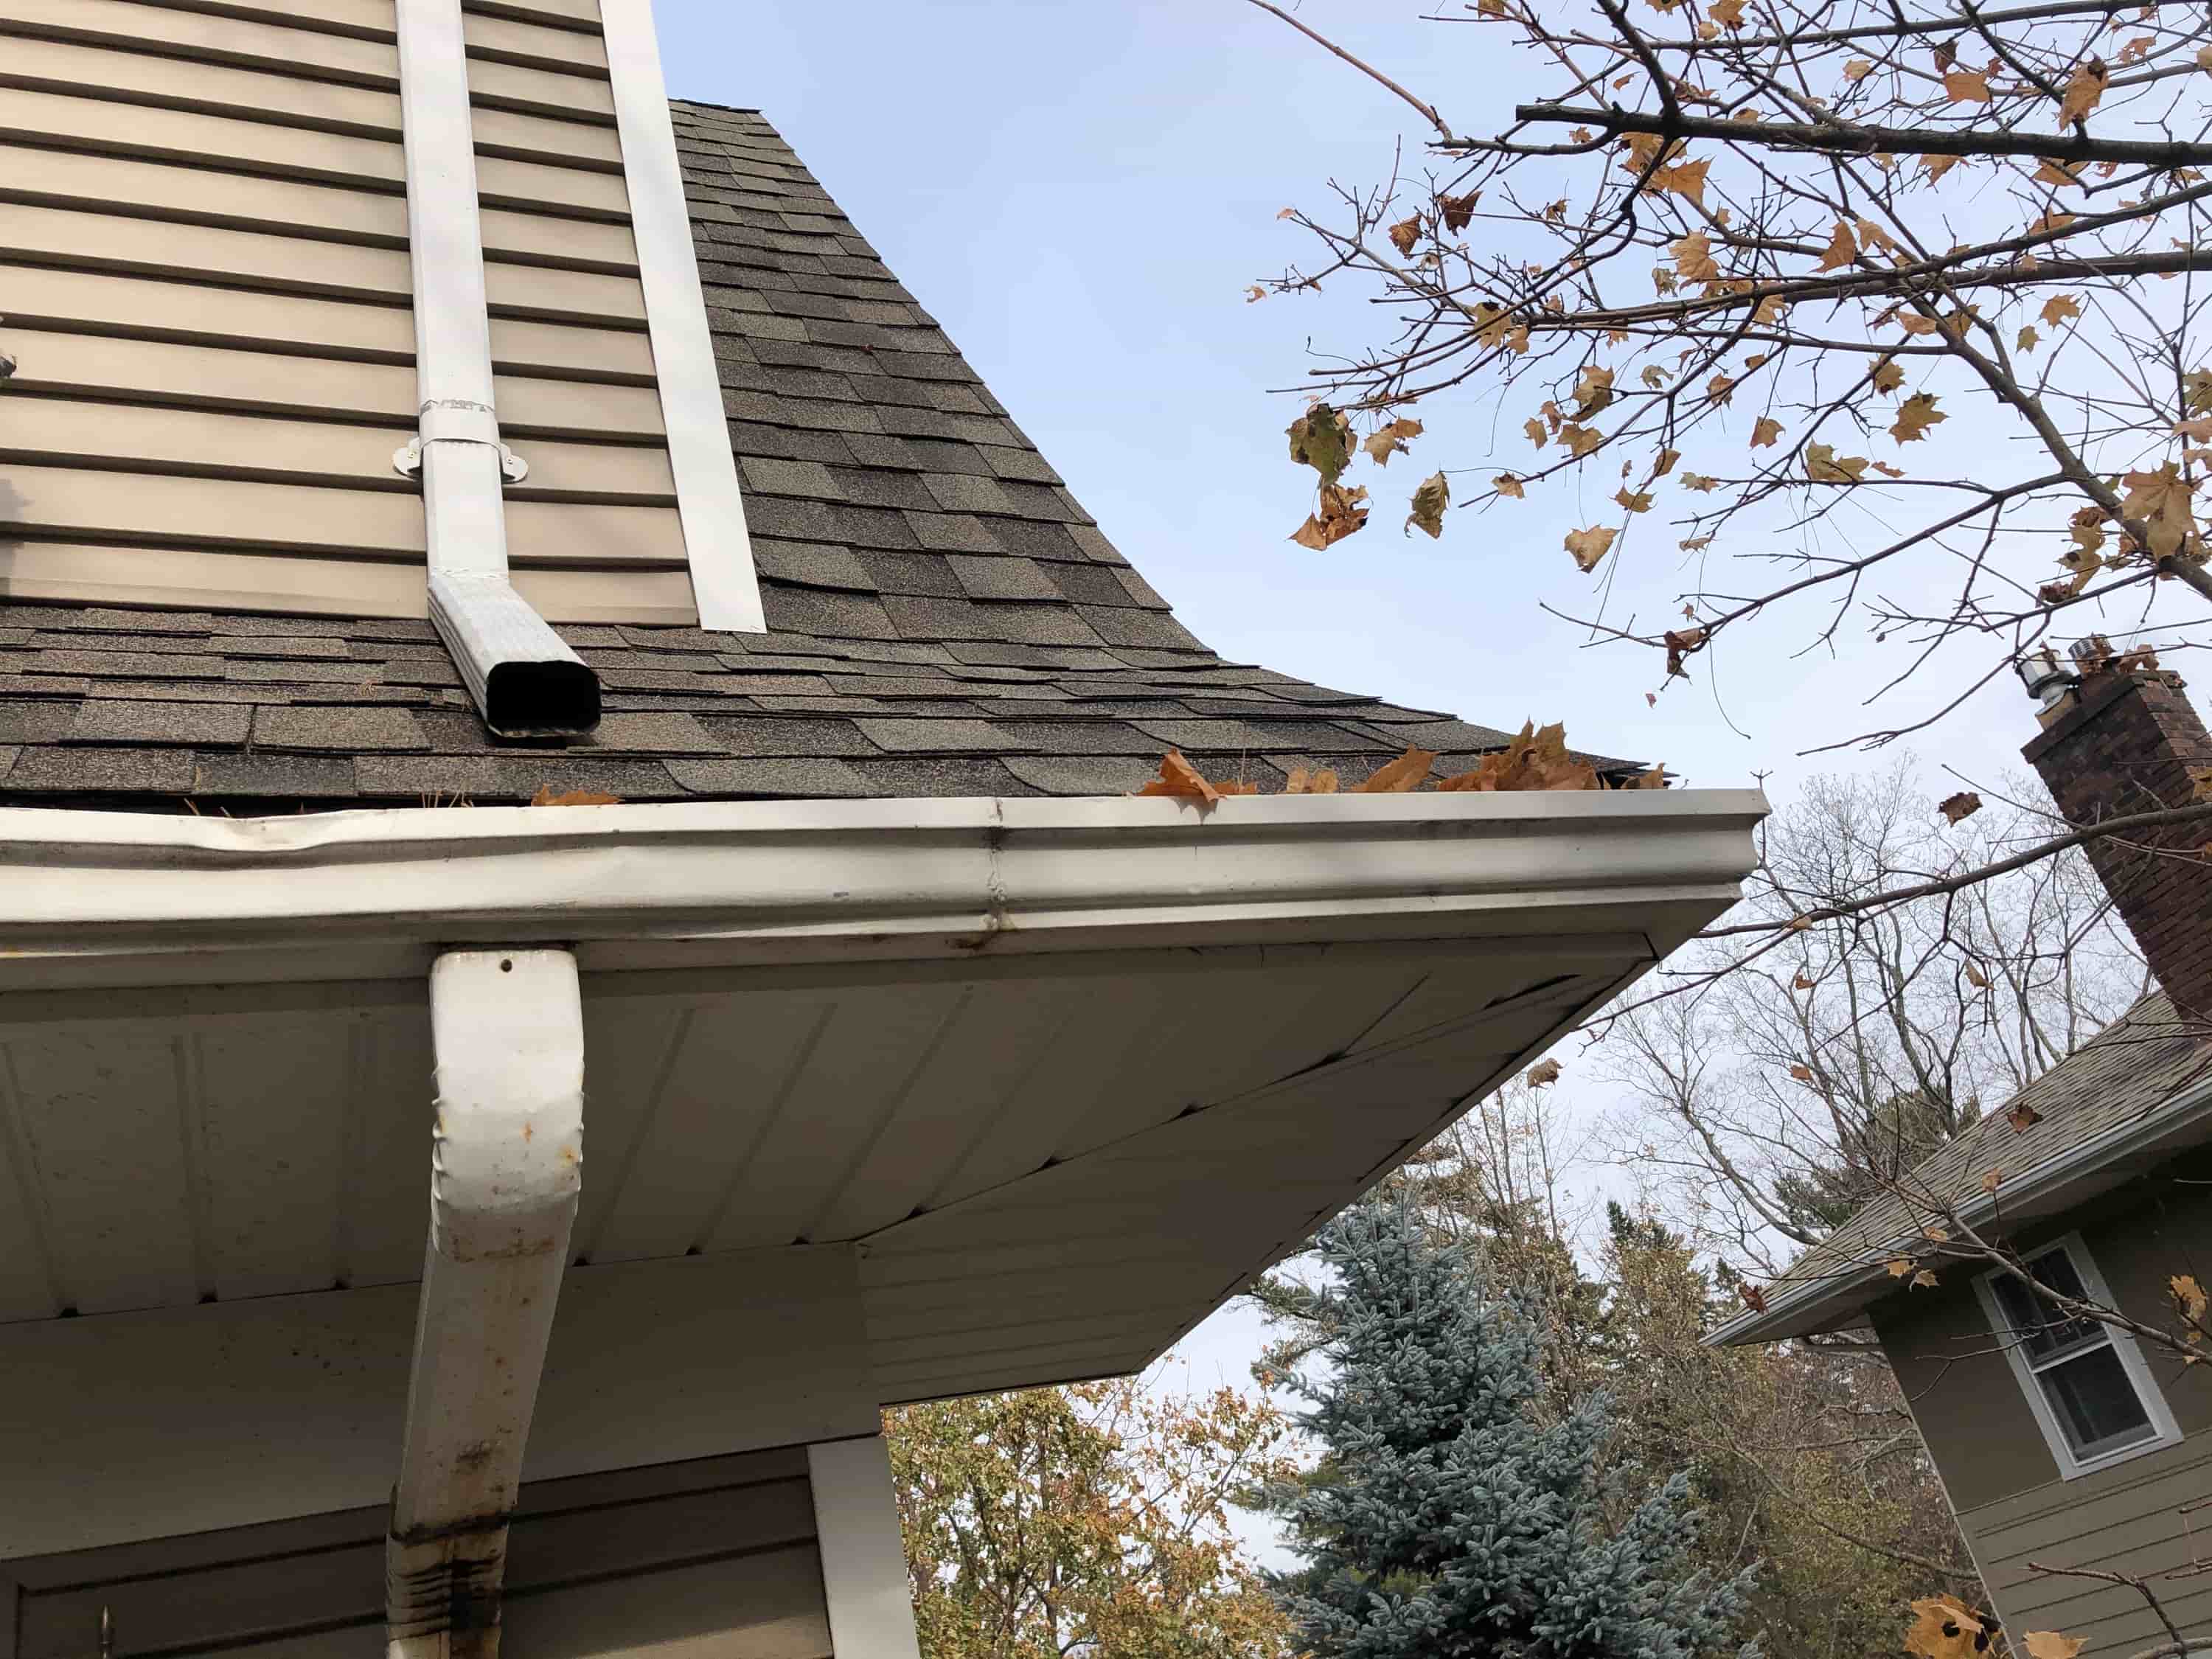 gutter cleaning made easy